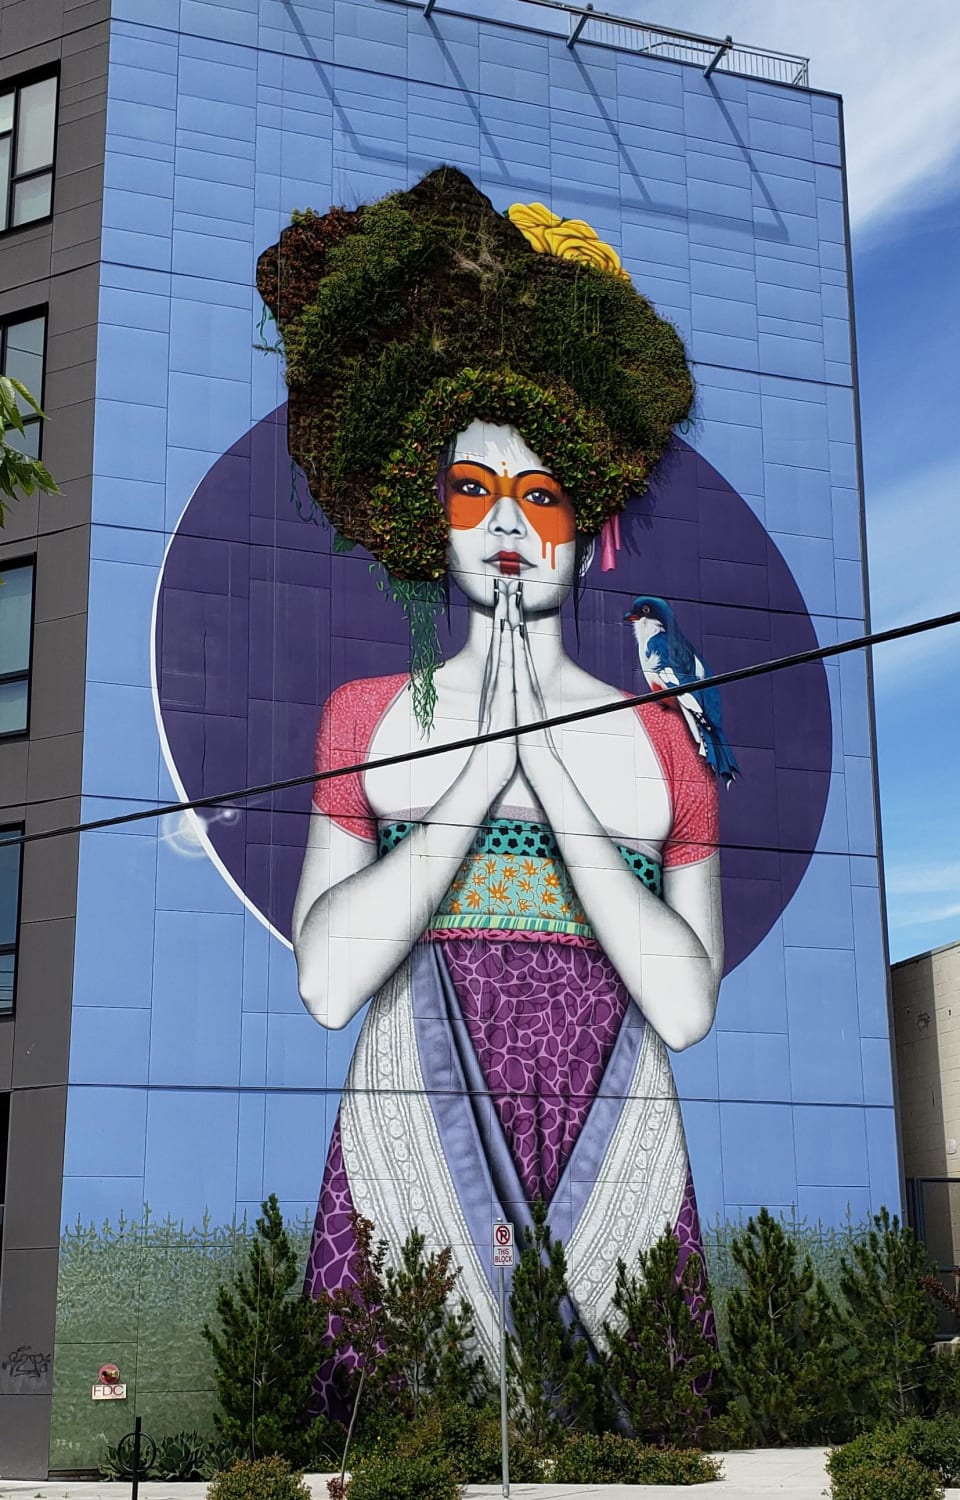 This mural has real plants for hair